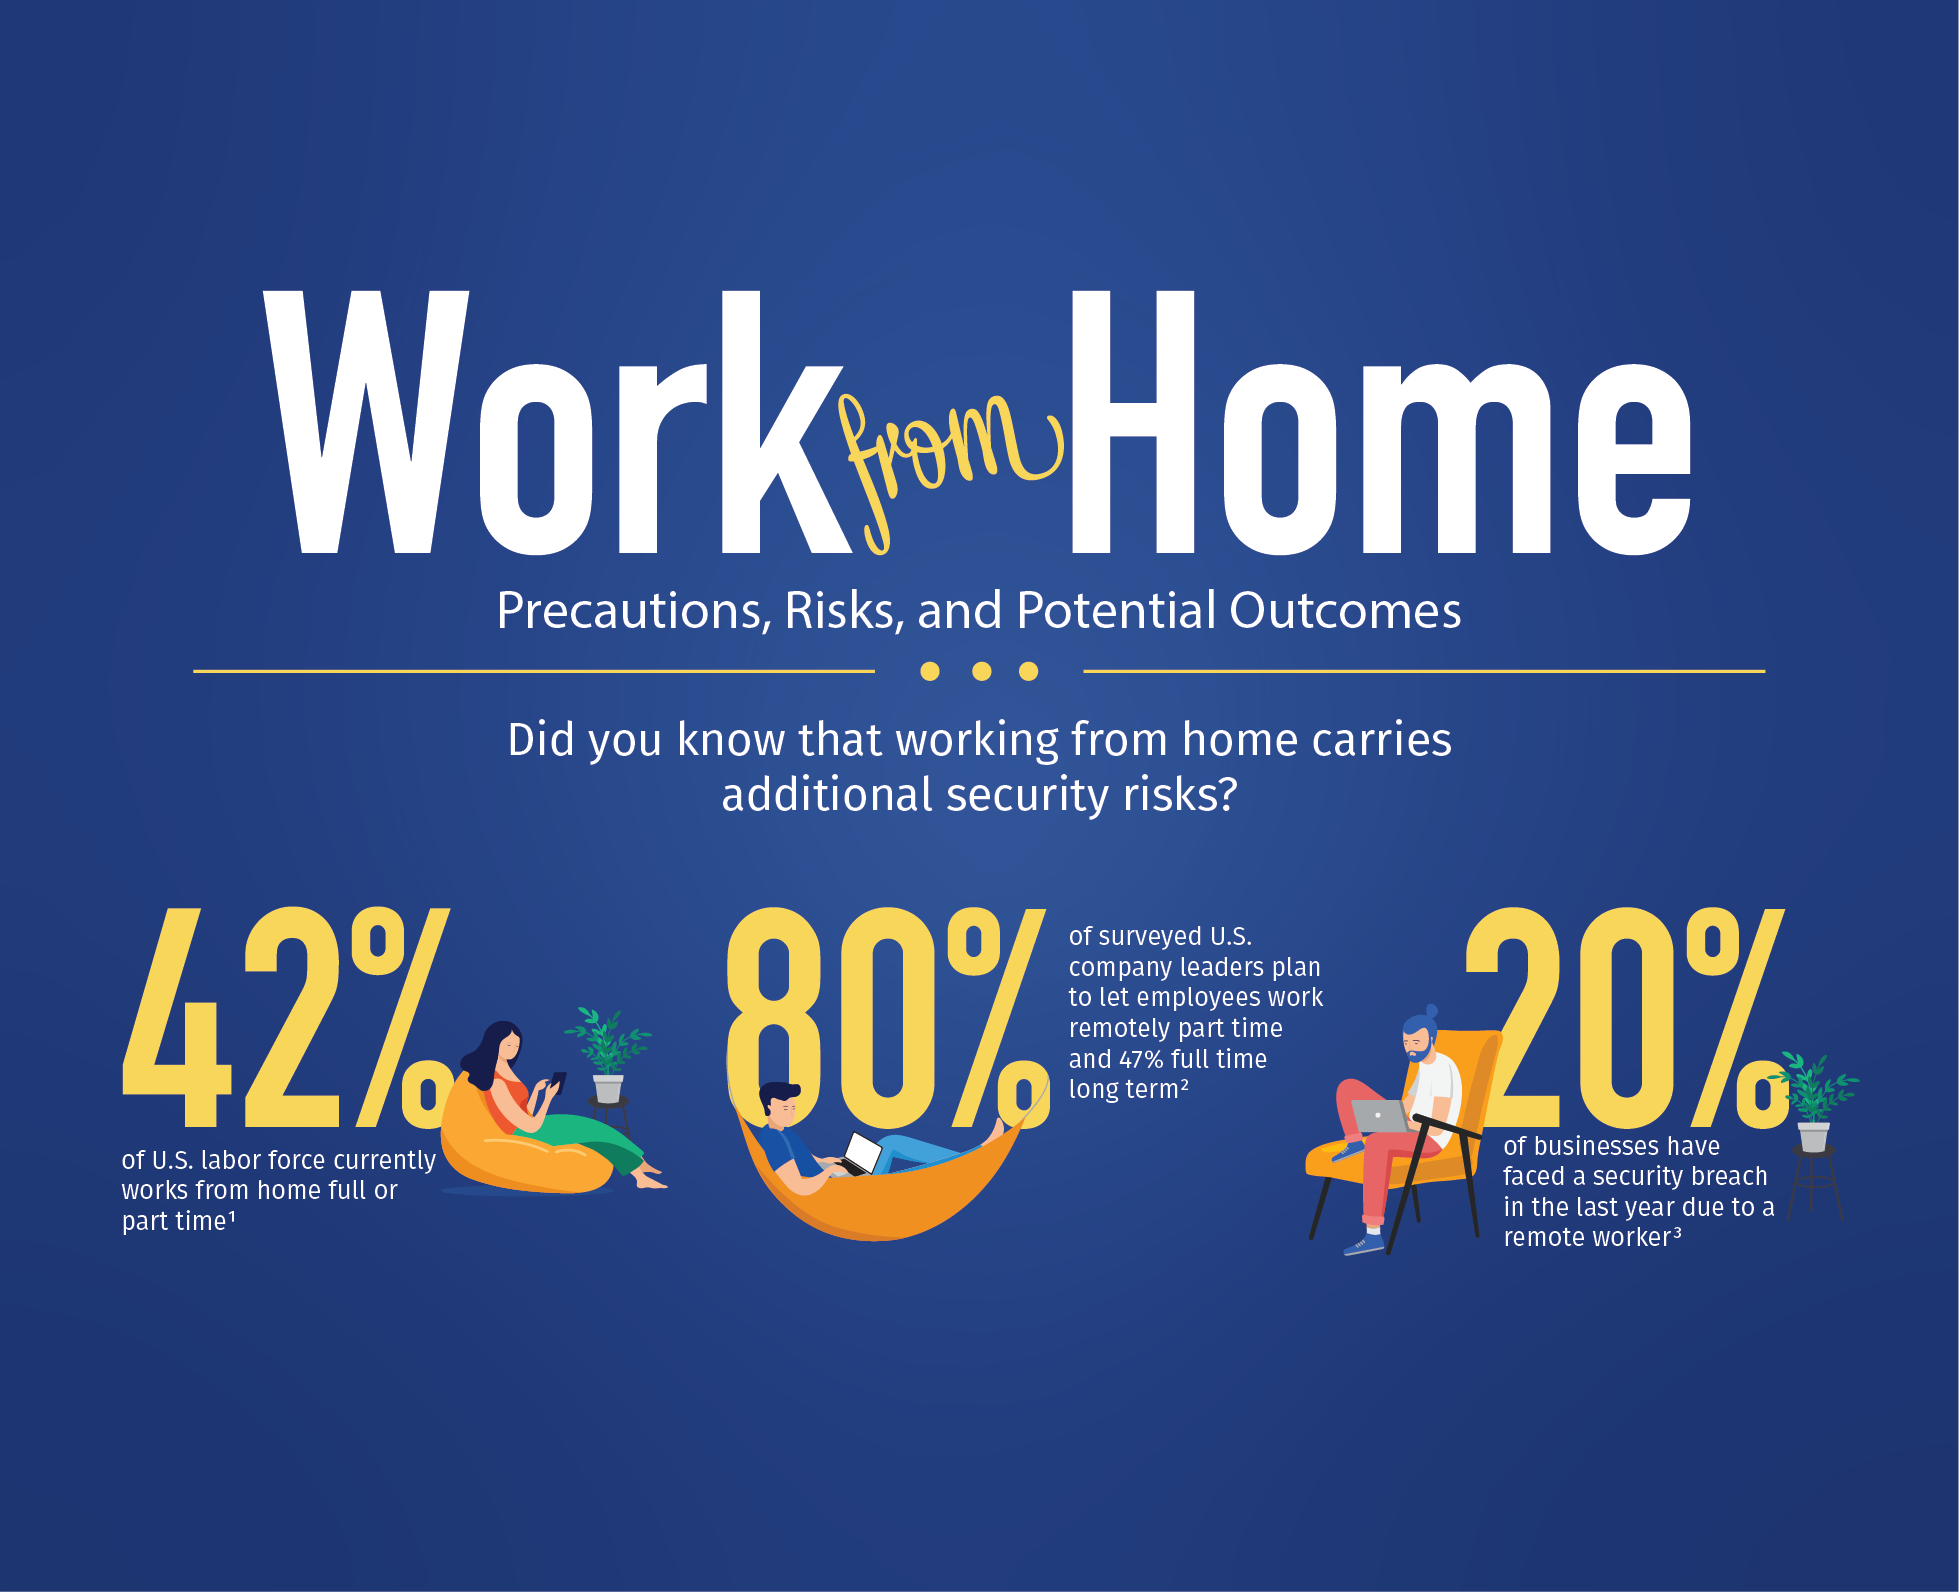 Work from Home- Precautions, Risks, and Potential Outcomes